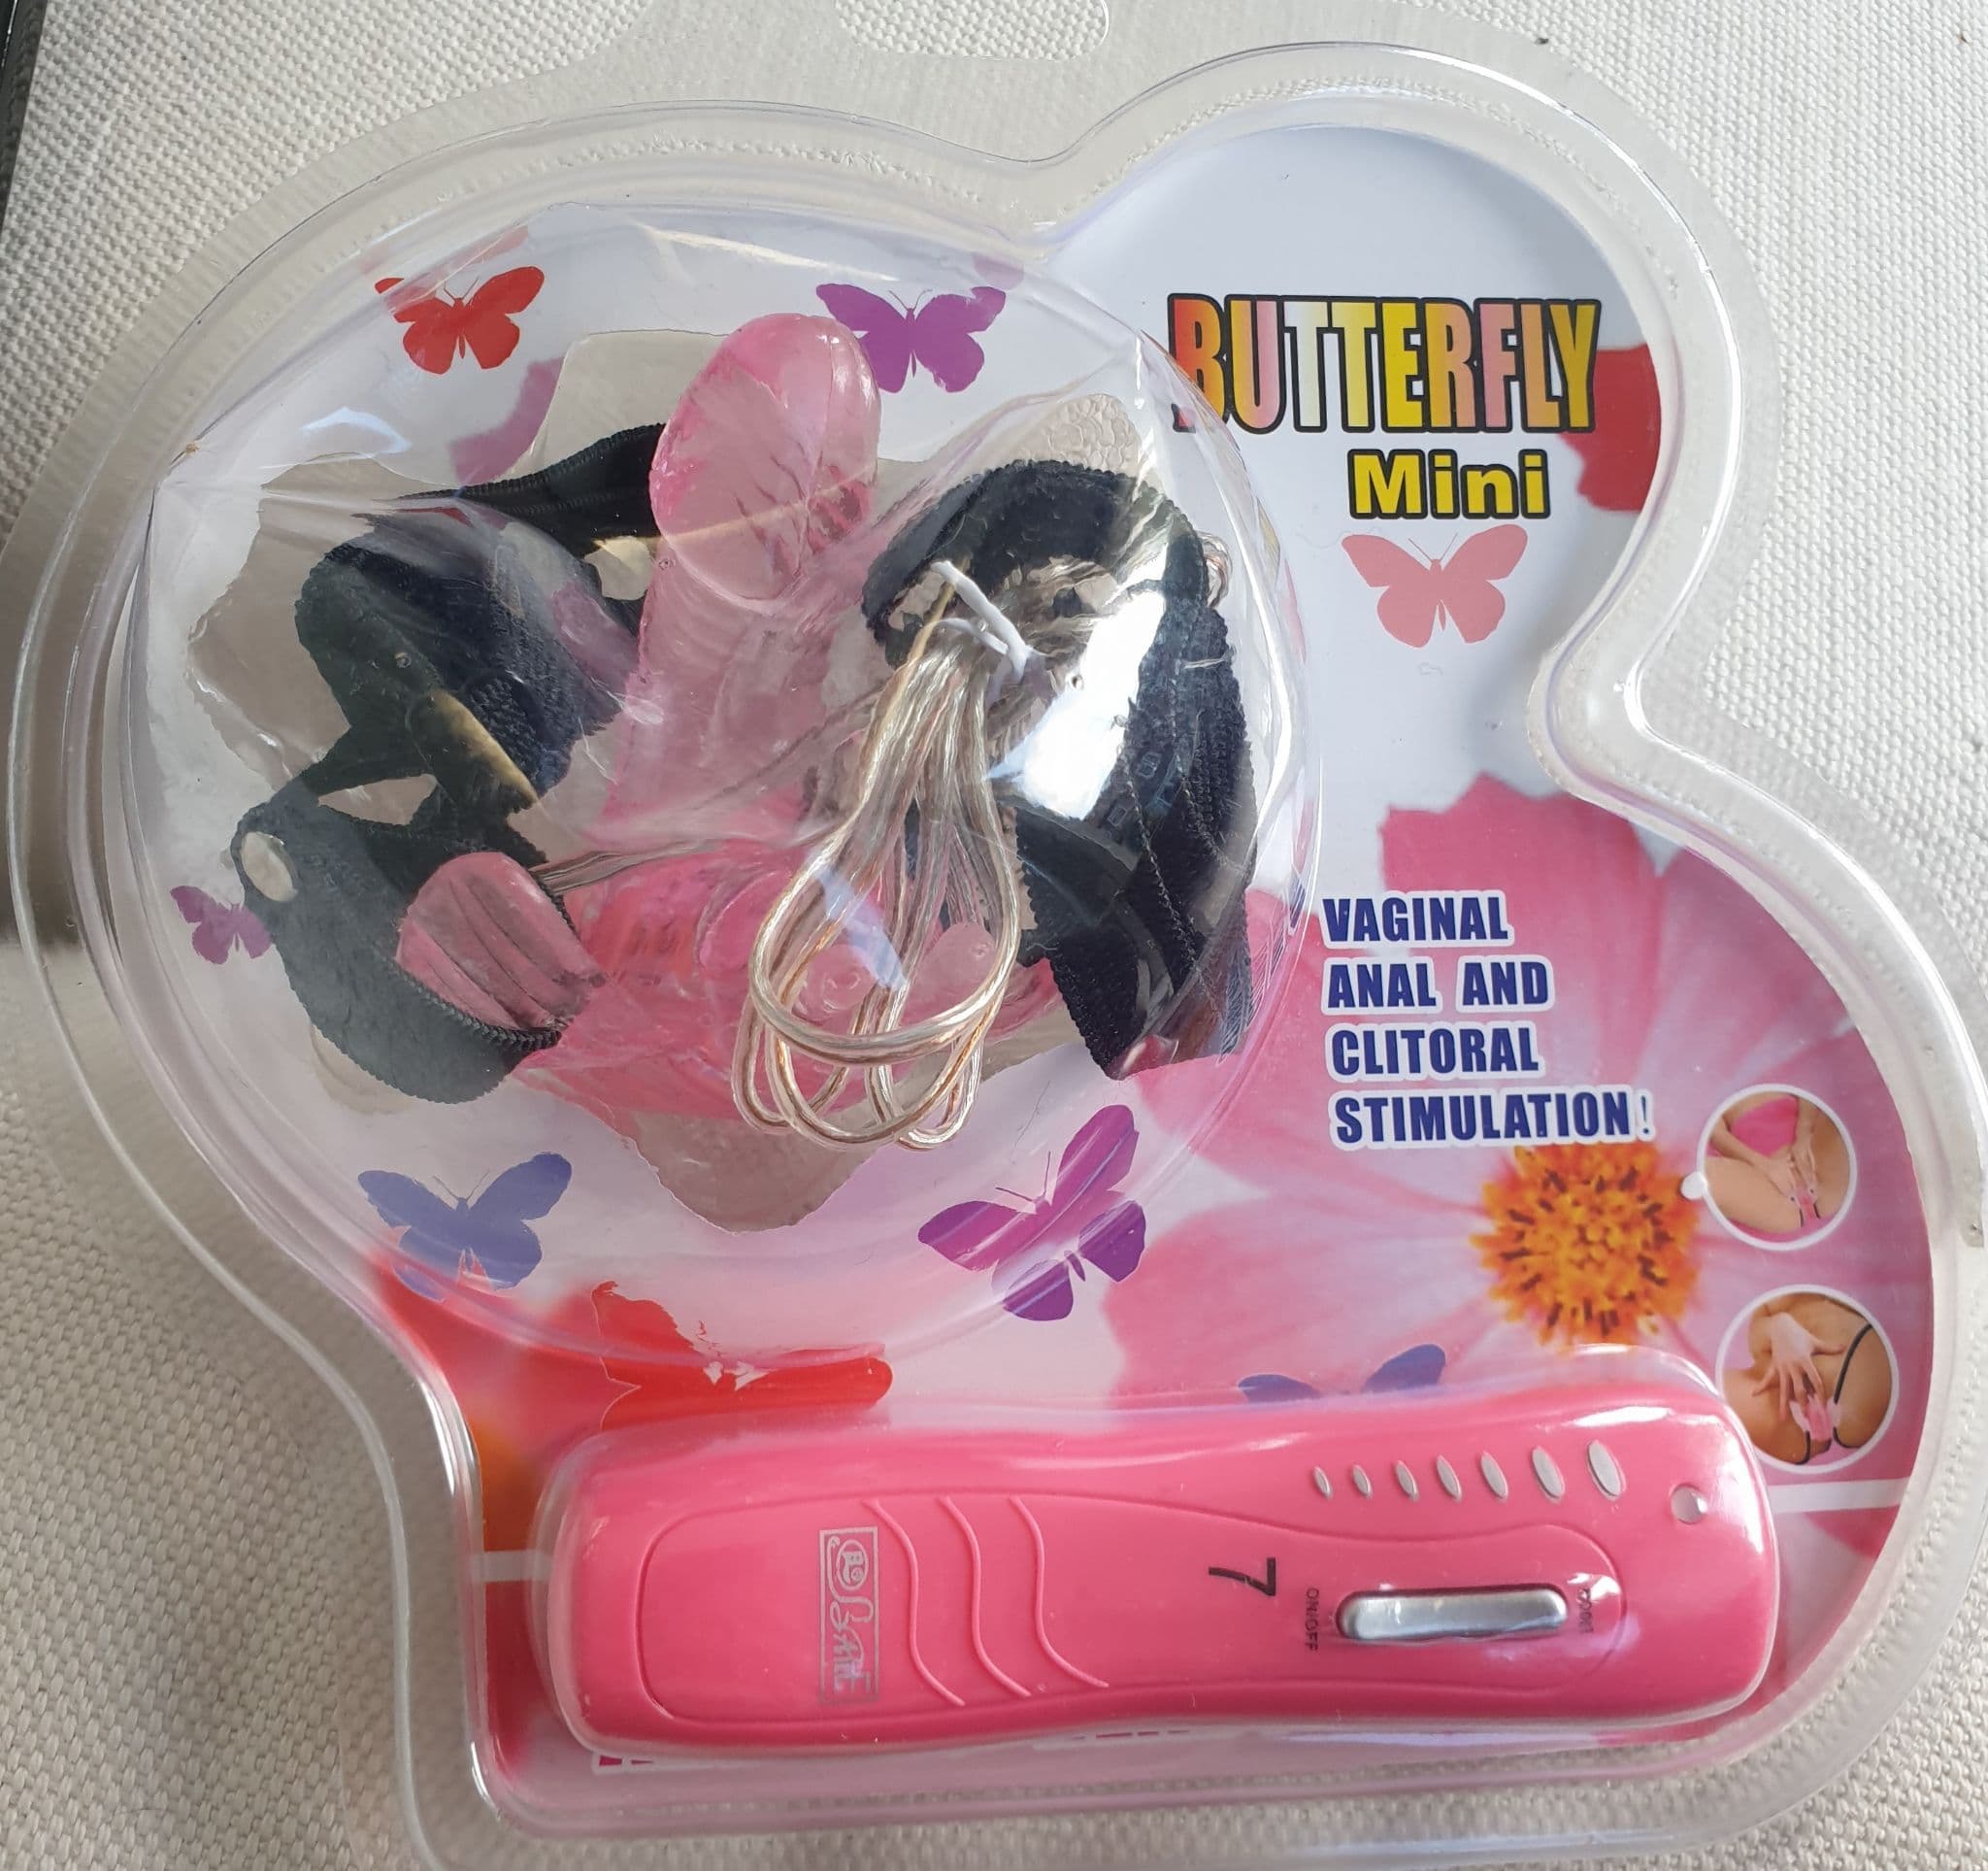 Mini Butterfly Strap On Vibrator with Dildo